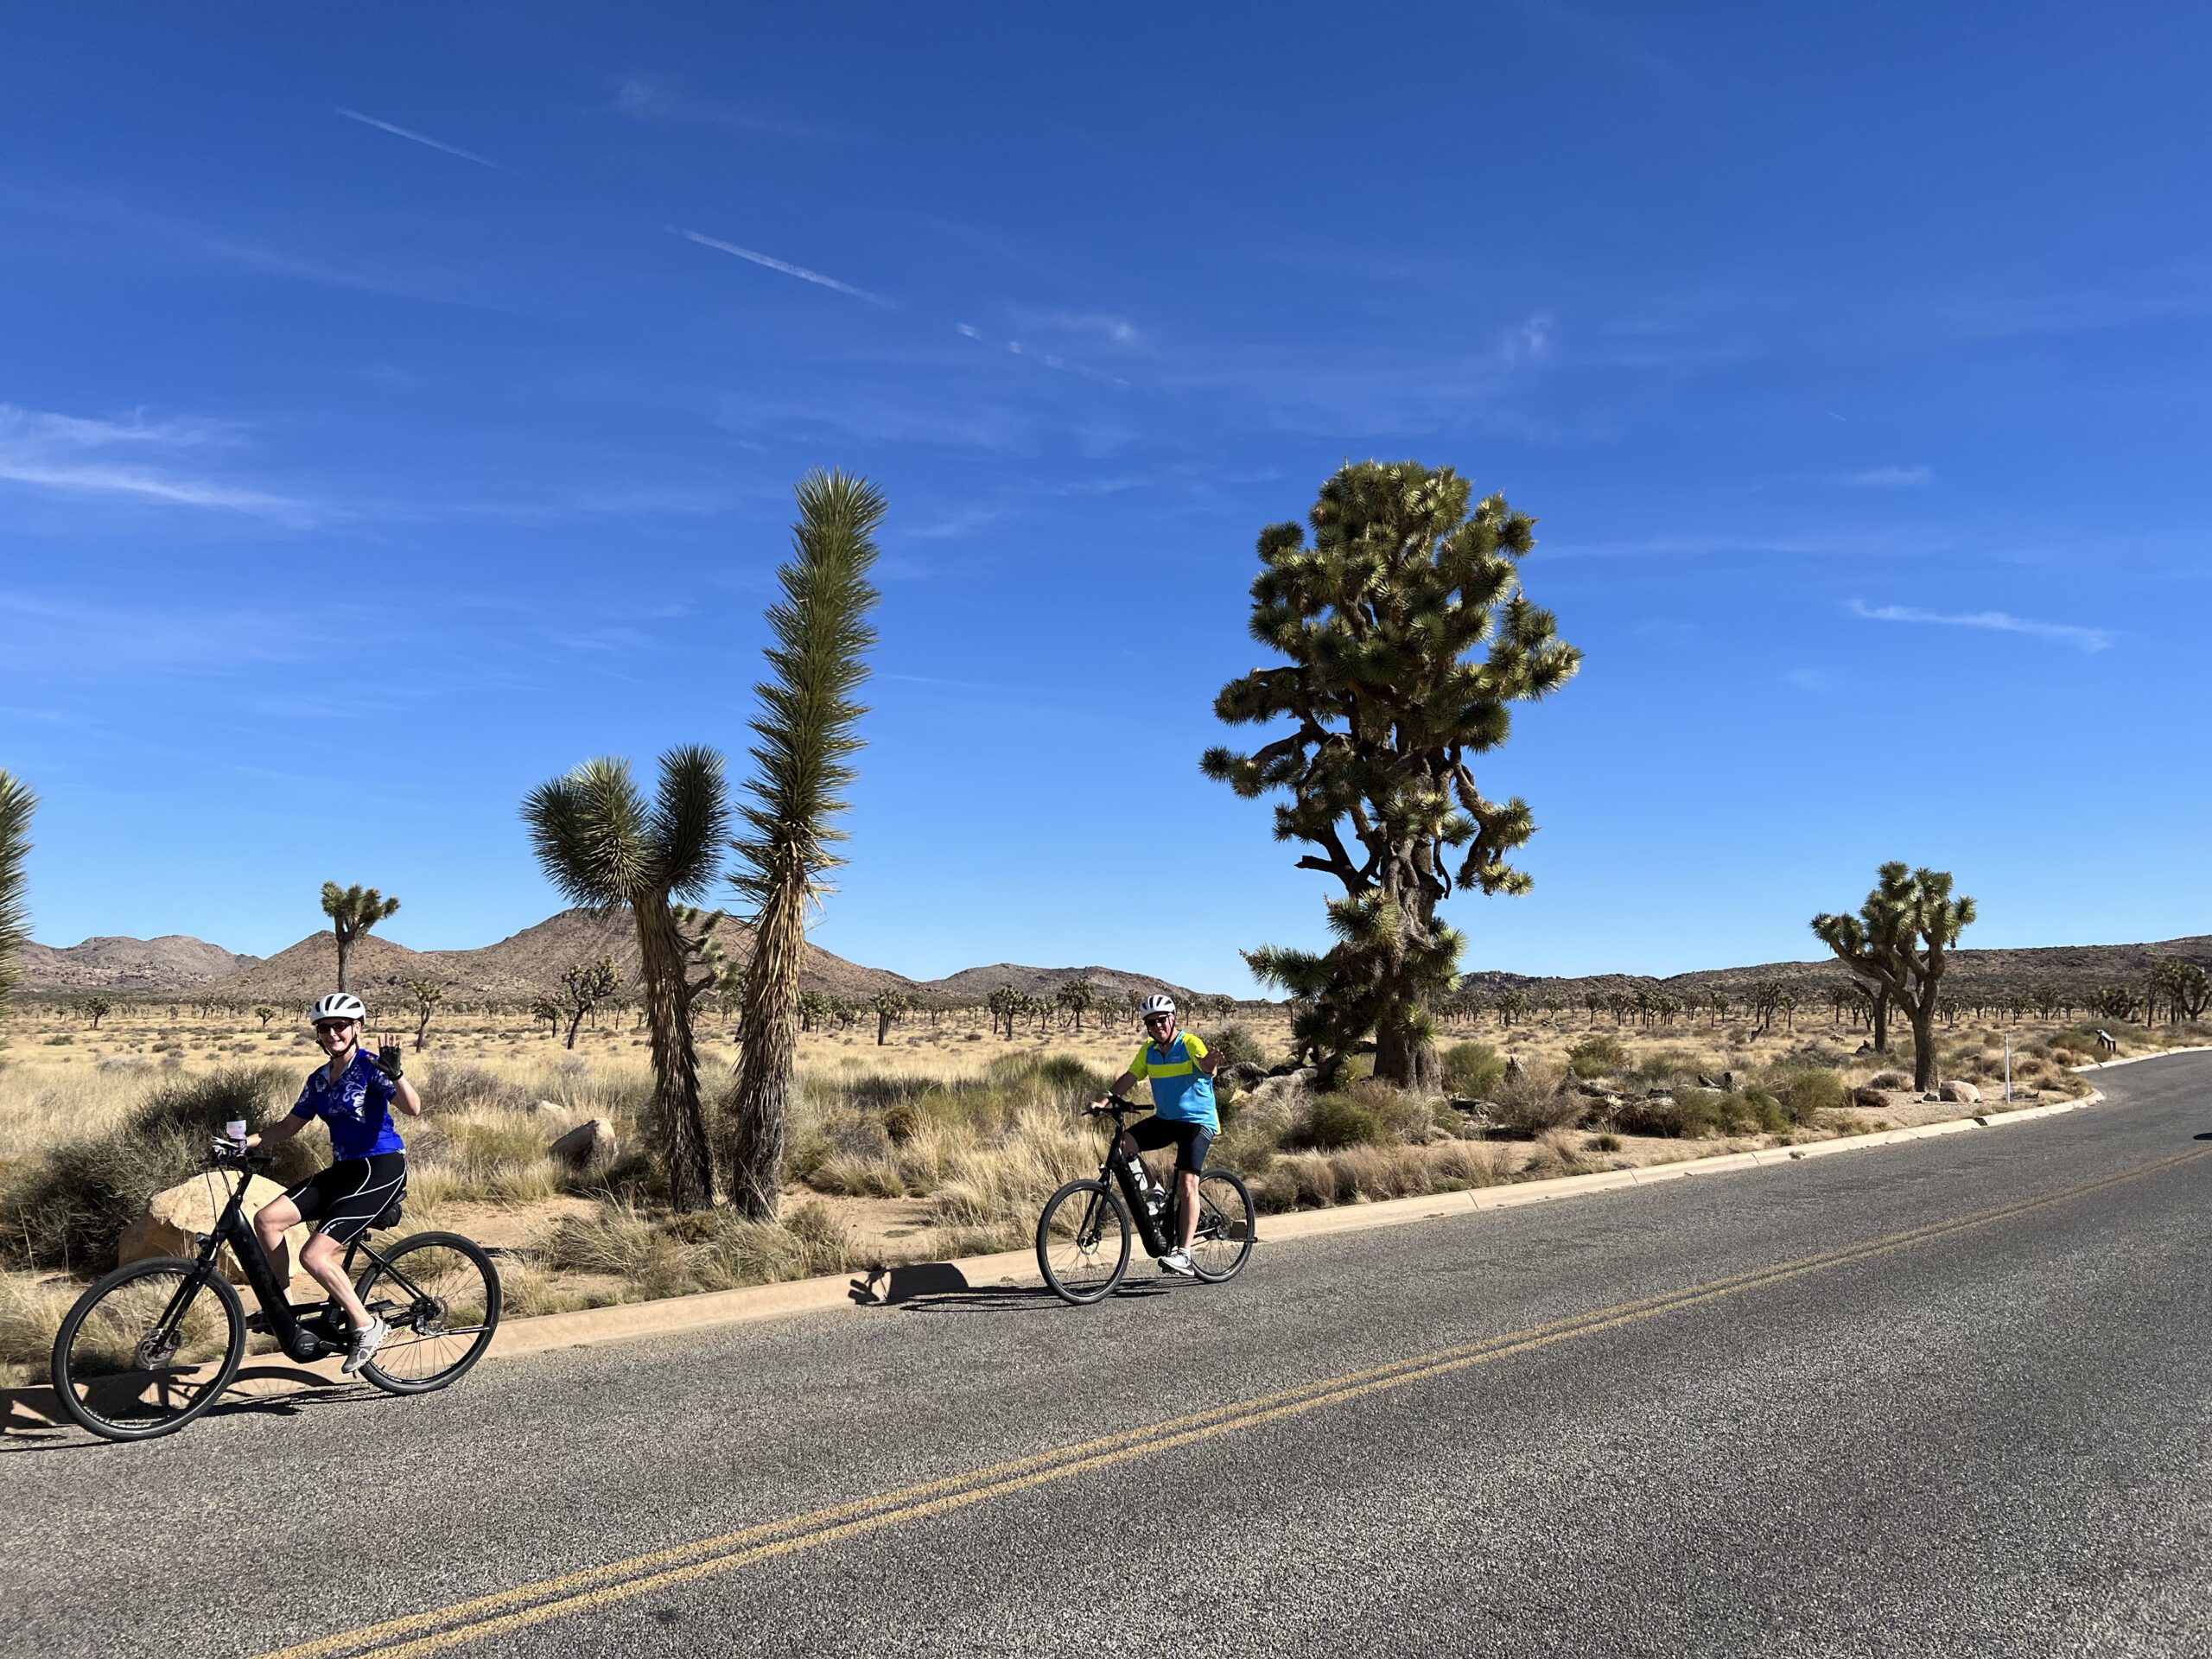 Two cyclists riding by cacti and waving